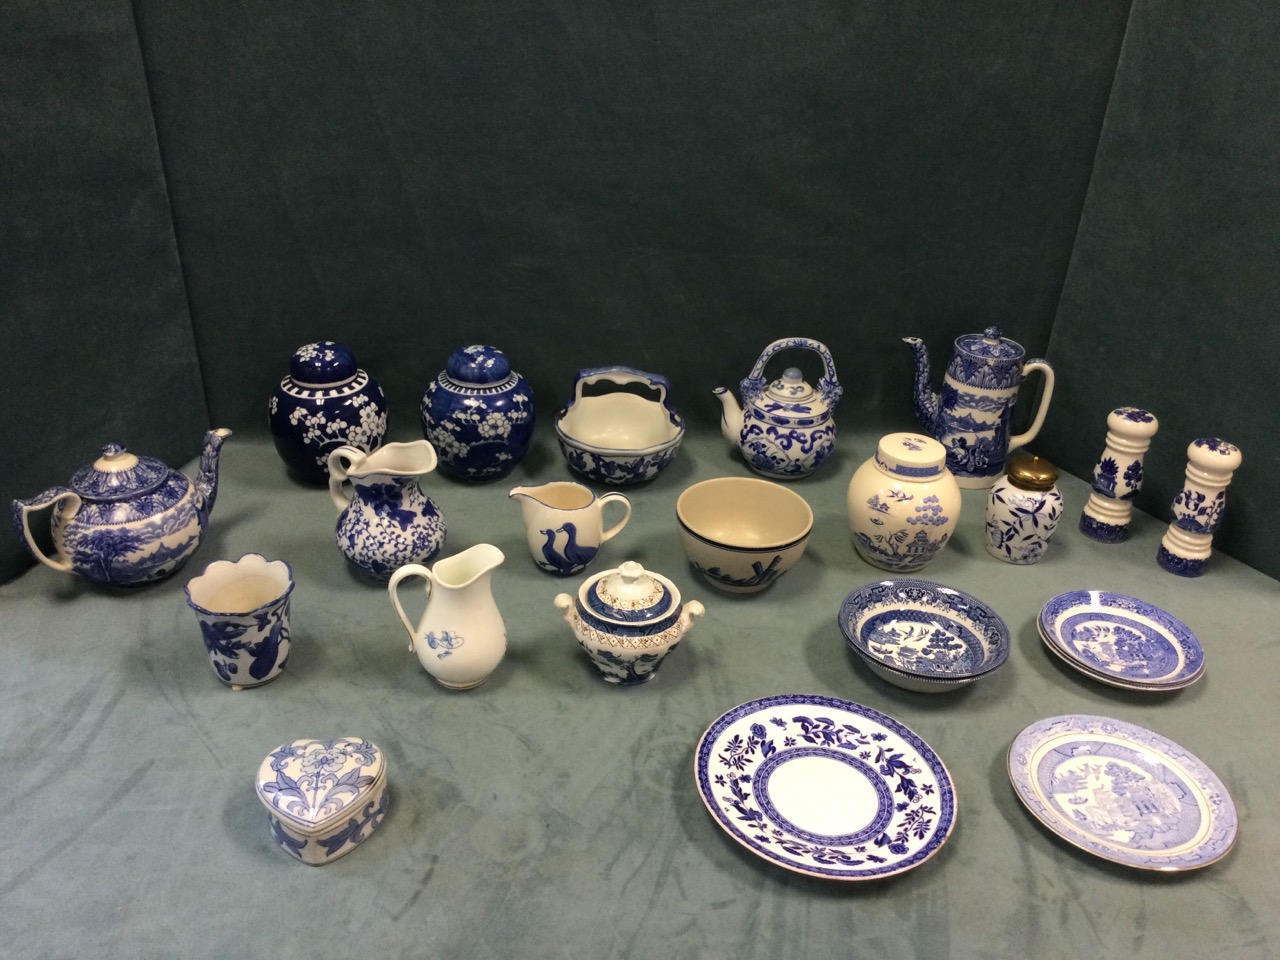 Miscellaneous blue & white ceramics including teapots, a pair of ginger jars & covers, jugs,